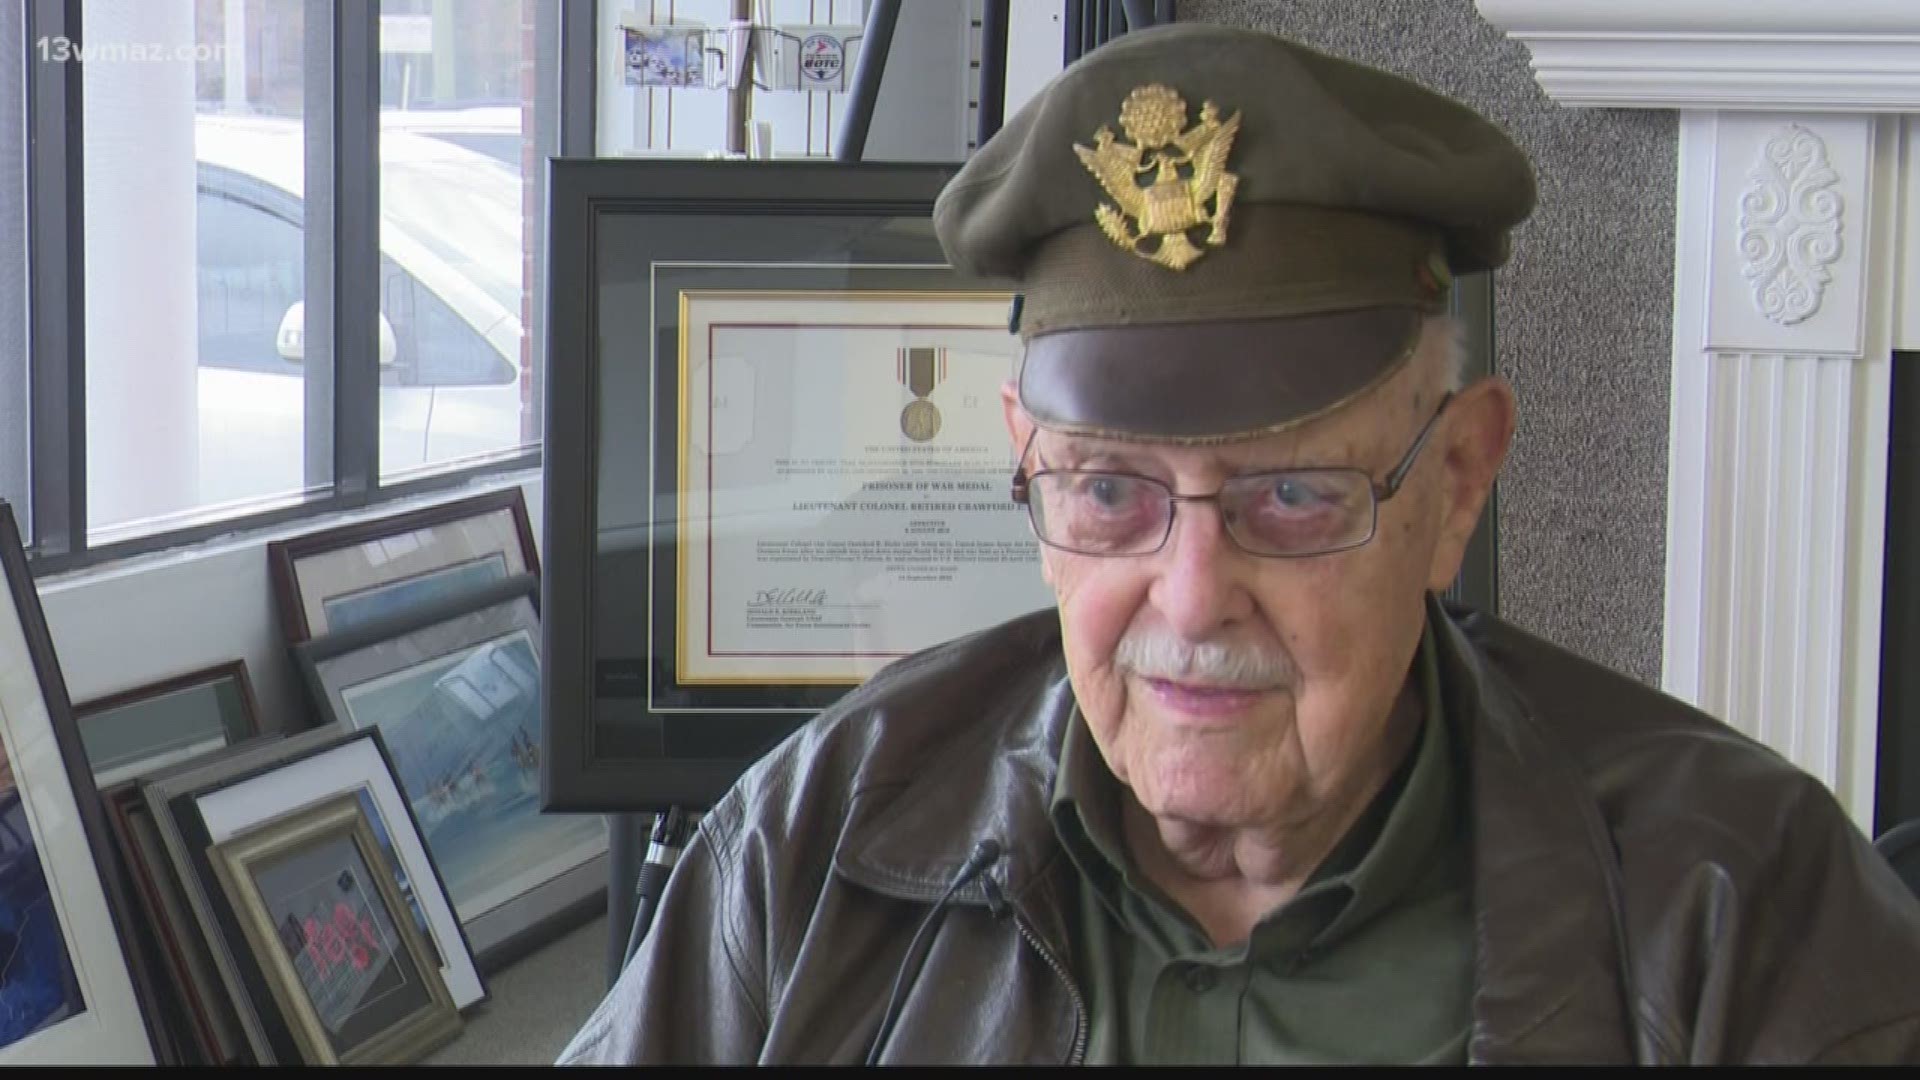 Lt. Colonel Crawford Hicks has seen a lot in his 98 years, but getting shot down over Germany during WWII and being held as a POW is something he won't forget.